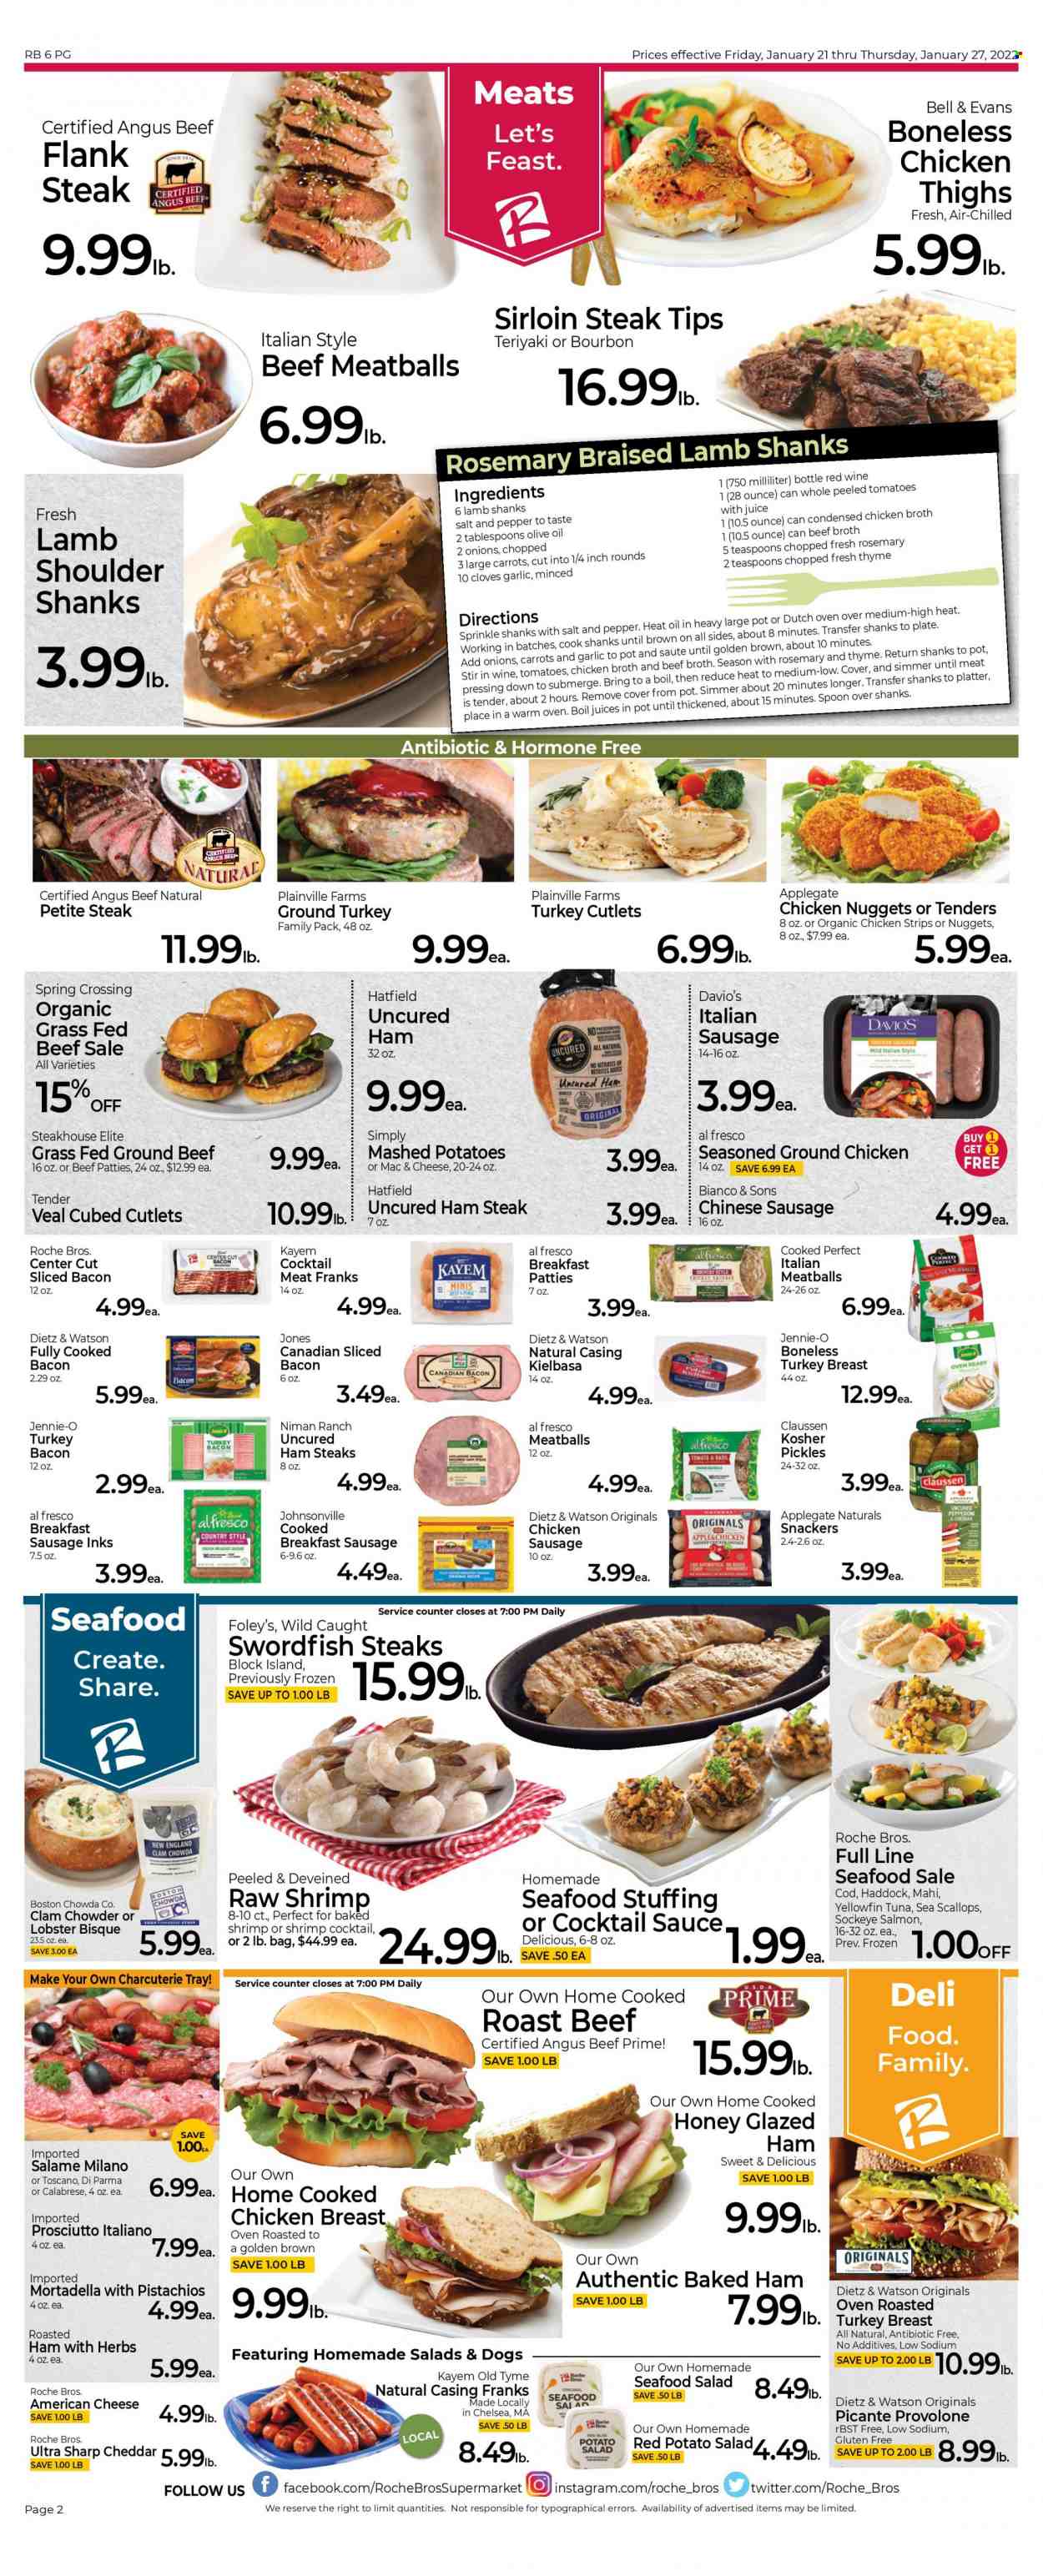 thumbnail - Roche Bros. Flyer - 01/21/2022 - 01/27/2022 - Sales products - garlic, cod, lobster, salmon, scallops, swordfish, haddock, seafood, shrimps, mashed potatoes, meatballs, nuggets, chicken nuggets, bacon, canadian bacon, mortadella, turkey bacon, uncured ham, ham, prosciutto, Johnsonville, Dietz & Watson, sausage, chicken sausage, kielbasa, potato salad, seafood salad, ham steaks, american cheese, Provolone, chicken strips, beef broth, chicken broth, broth, pickles, clam chowder, rosemary, cloves, cocktail sauce, olive oil, juice, ground chicken, ground turkey, turkey breast, chicken thighs, beef meat, beef sirloin, ground beef, steak, roast beef, sirloin steak, flank steak, lamb meat, lamb shoulder, pot. Page 2.